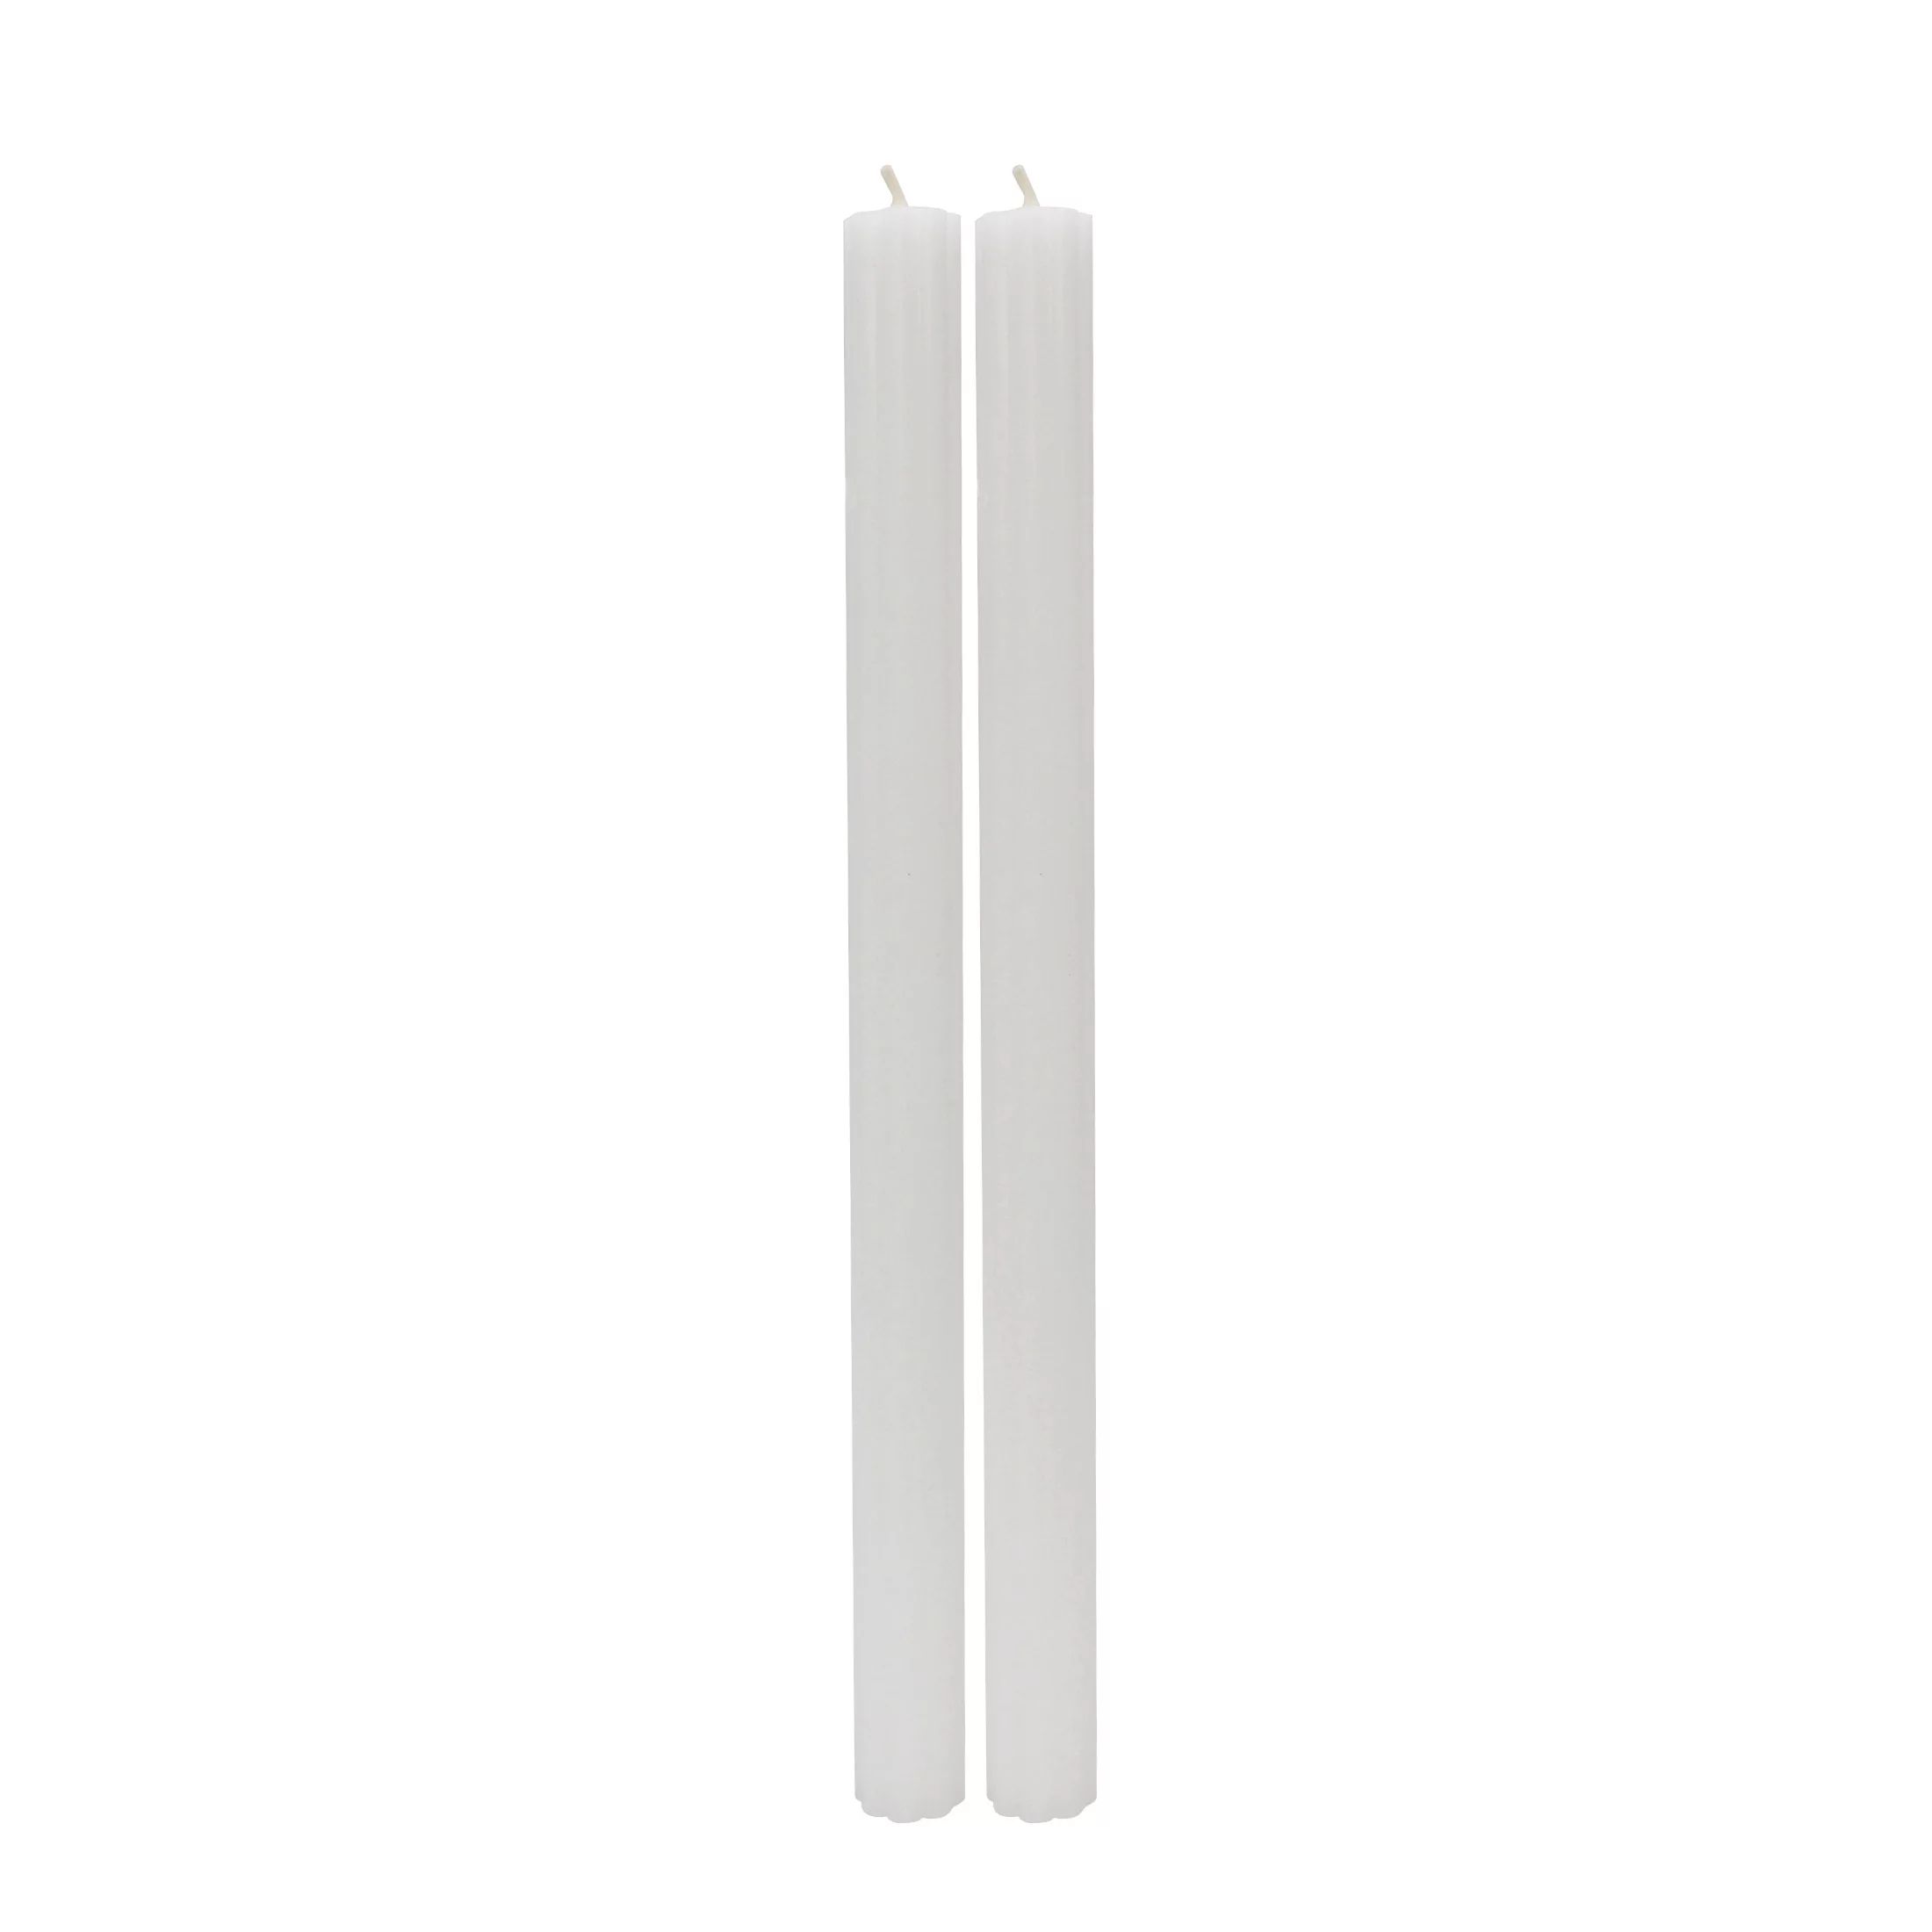 Better Homes & Gardens Unscented Taper Candles, White, 2-Pack, 11 inches Height | Walmart (US)